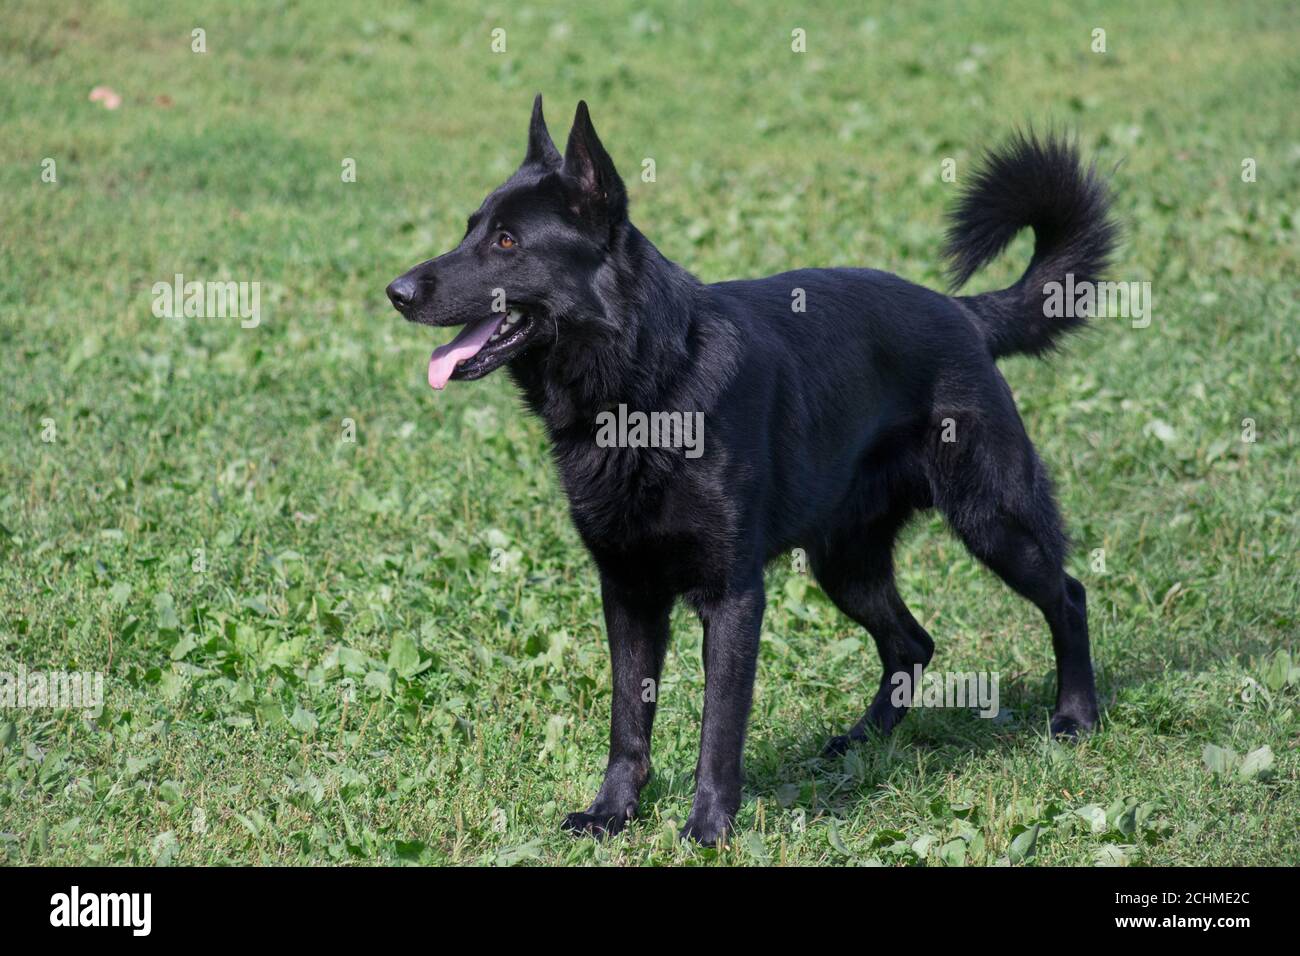 Cute black east european shepherd puppy is standing on a green grass in the summer park. Pet animals. Purebred dog. Stock Photo